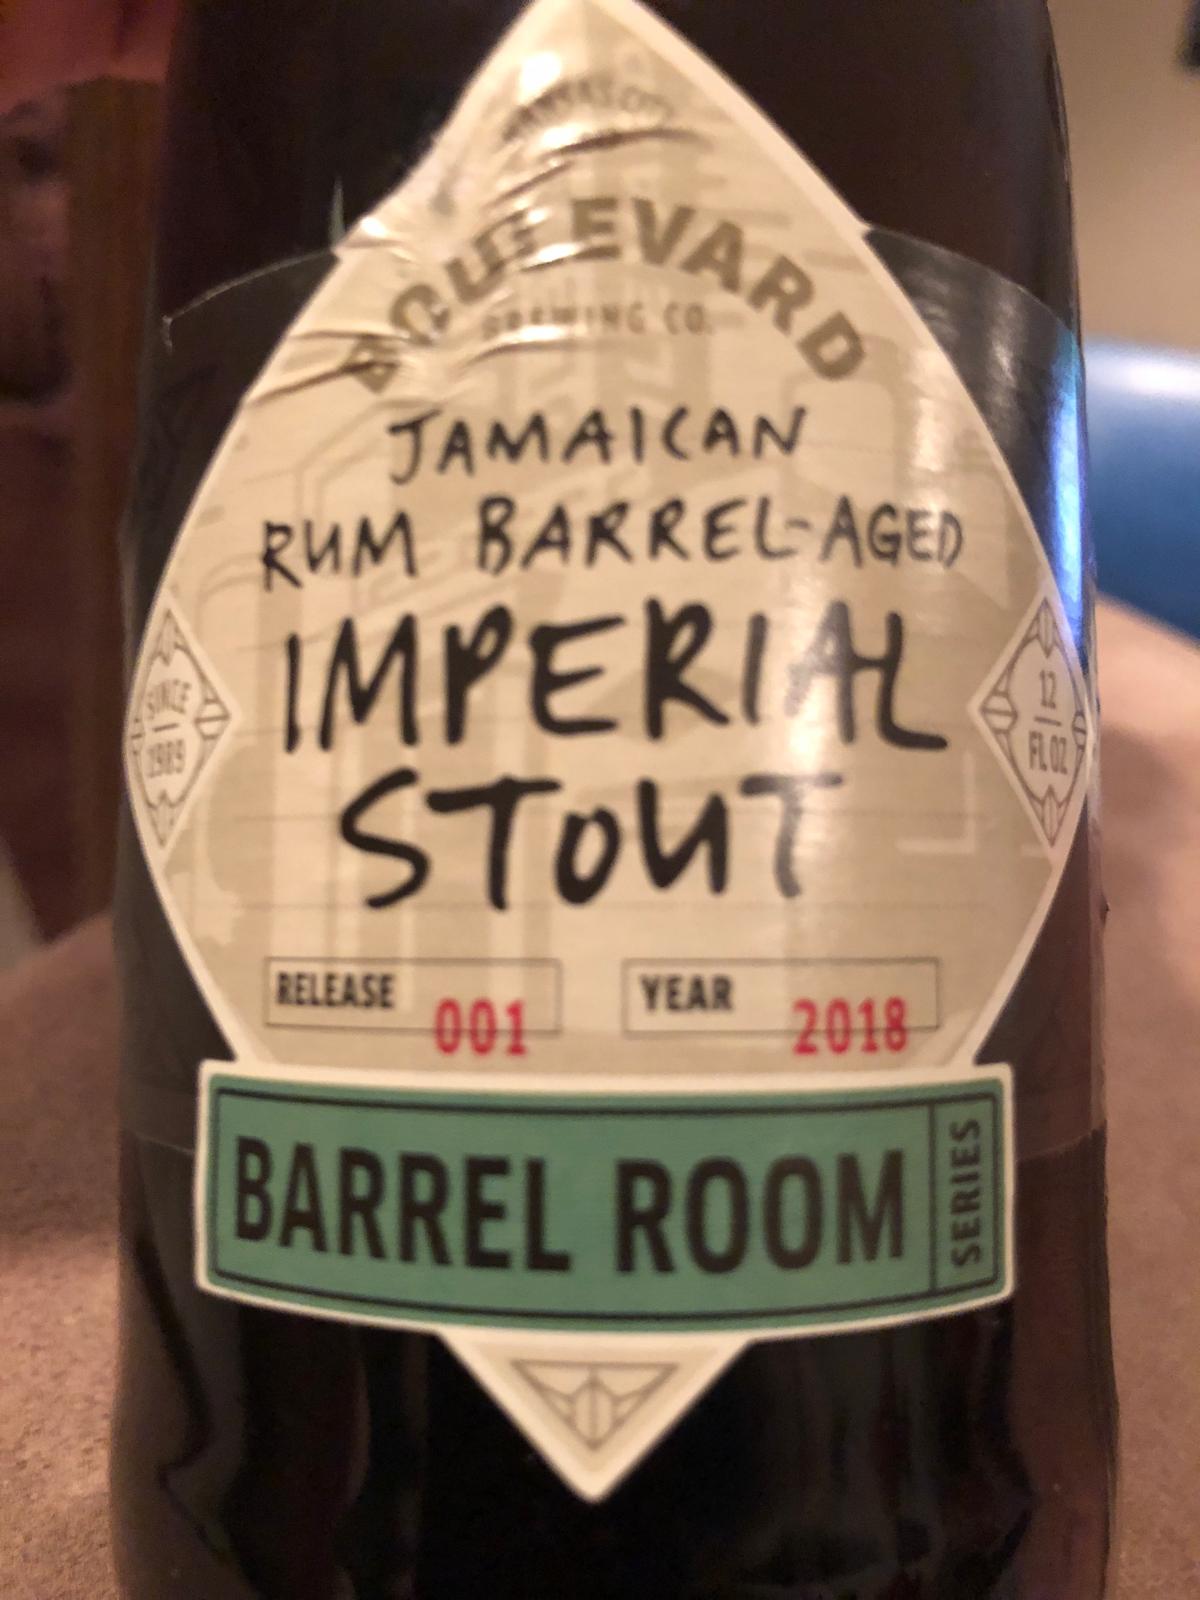 Imperial Stout (Jamaican Rum Barrel Aged)